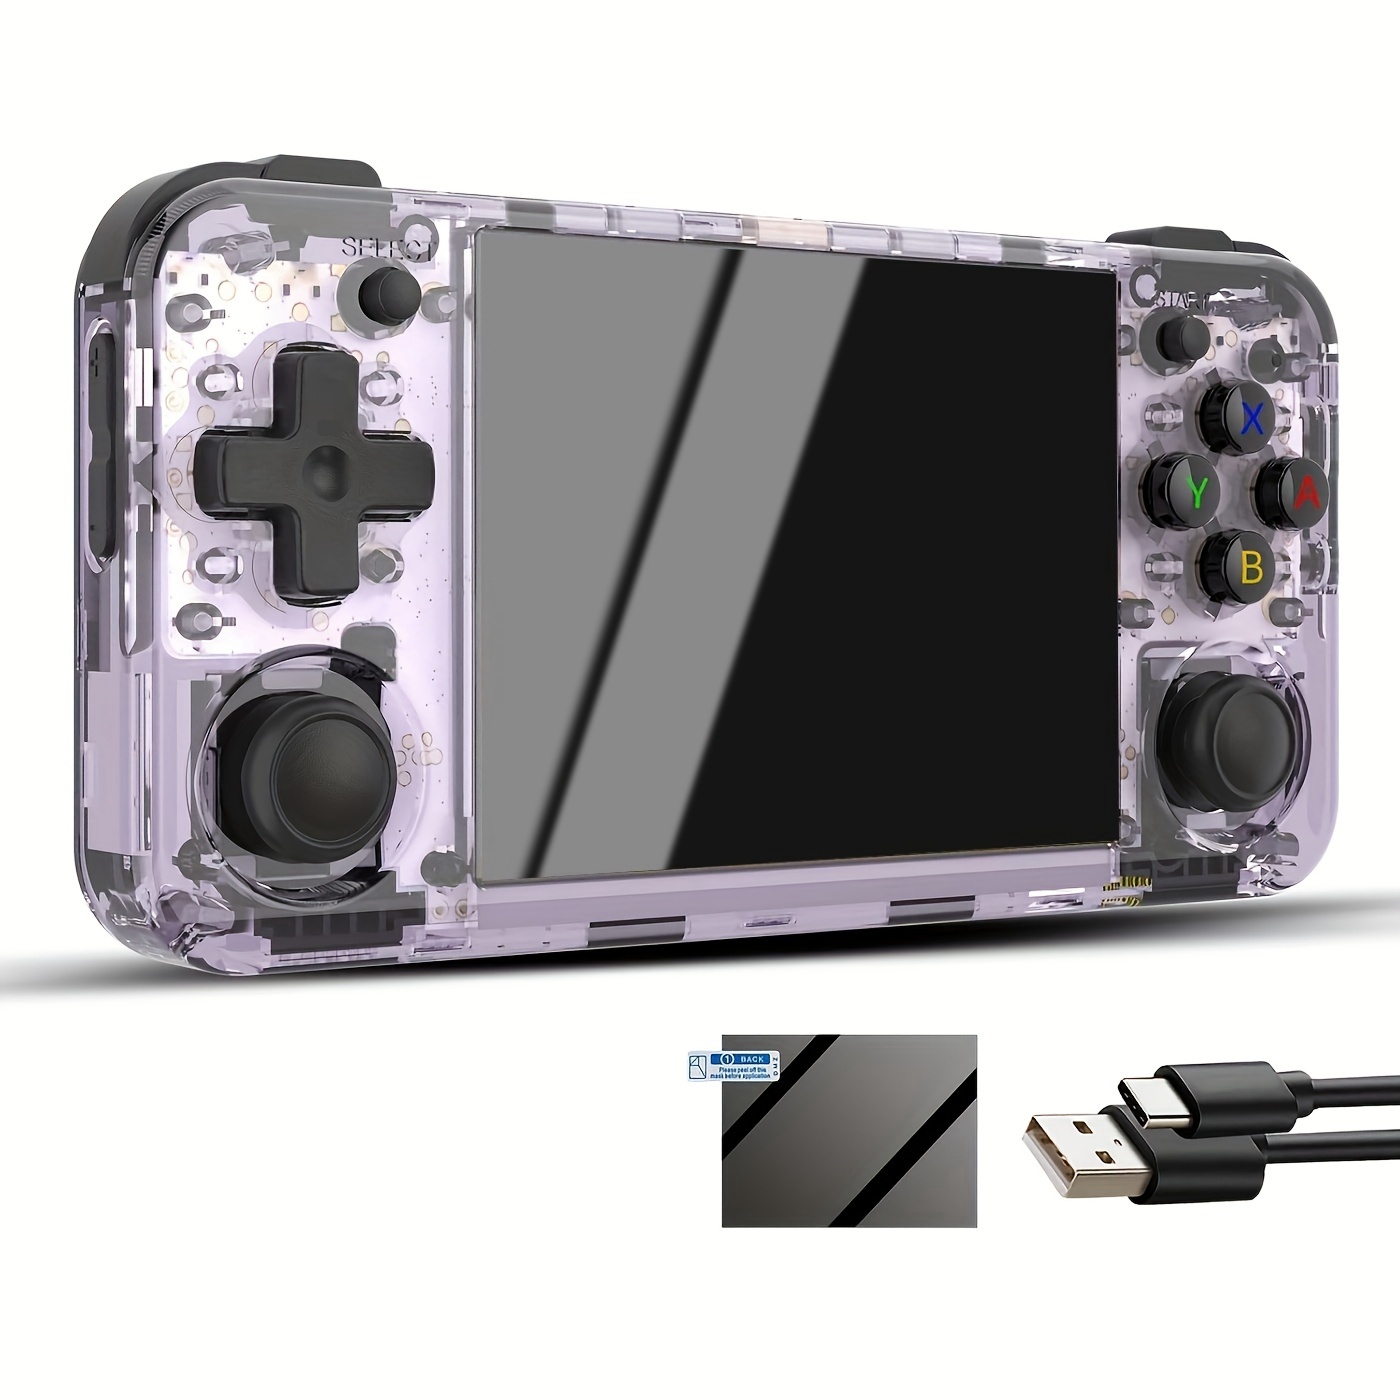 

Anbernic Handheld Game Console, 3.5 Inch Ips Screen Linux System Built-in 64g Tf Card, Support 5g Wifi And Other Outputs.